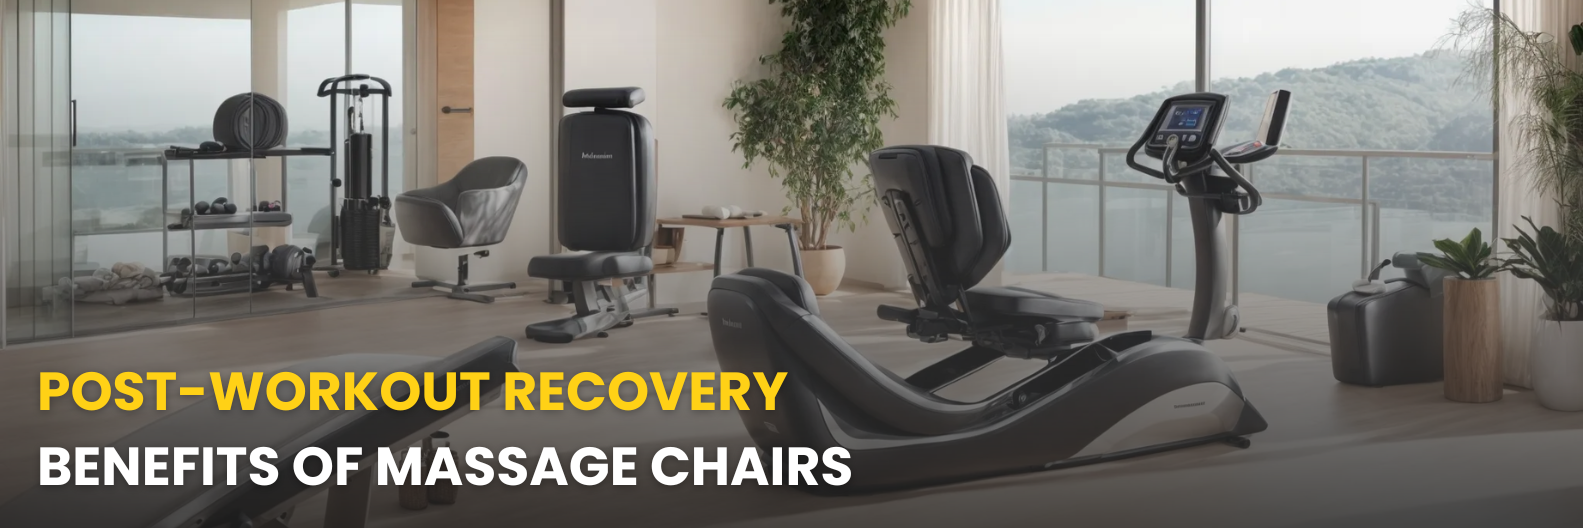 Boost Post-Workout Recovery with Massage Chairs: Experience Faster Recovery with Massage Chair Therapy – Start Today!